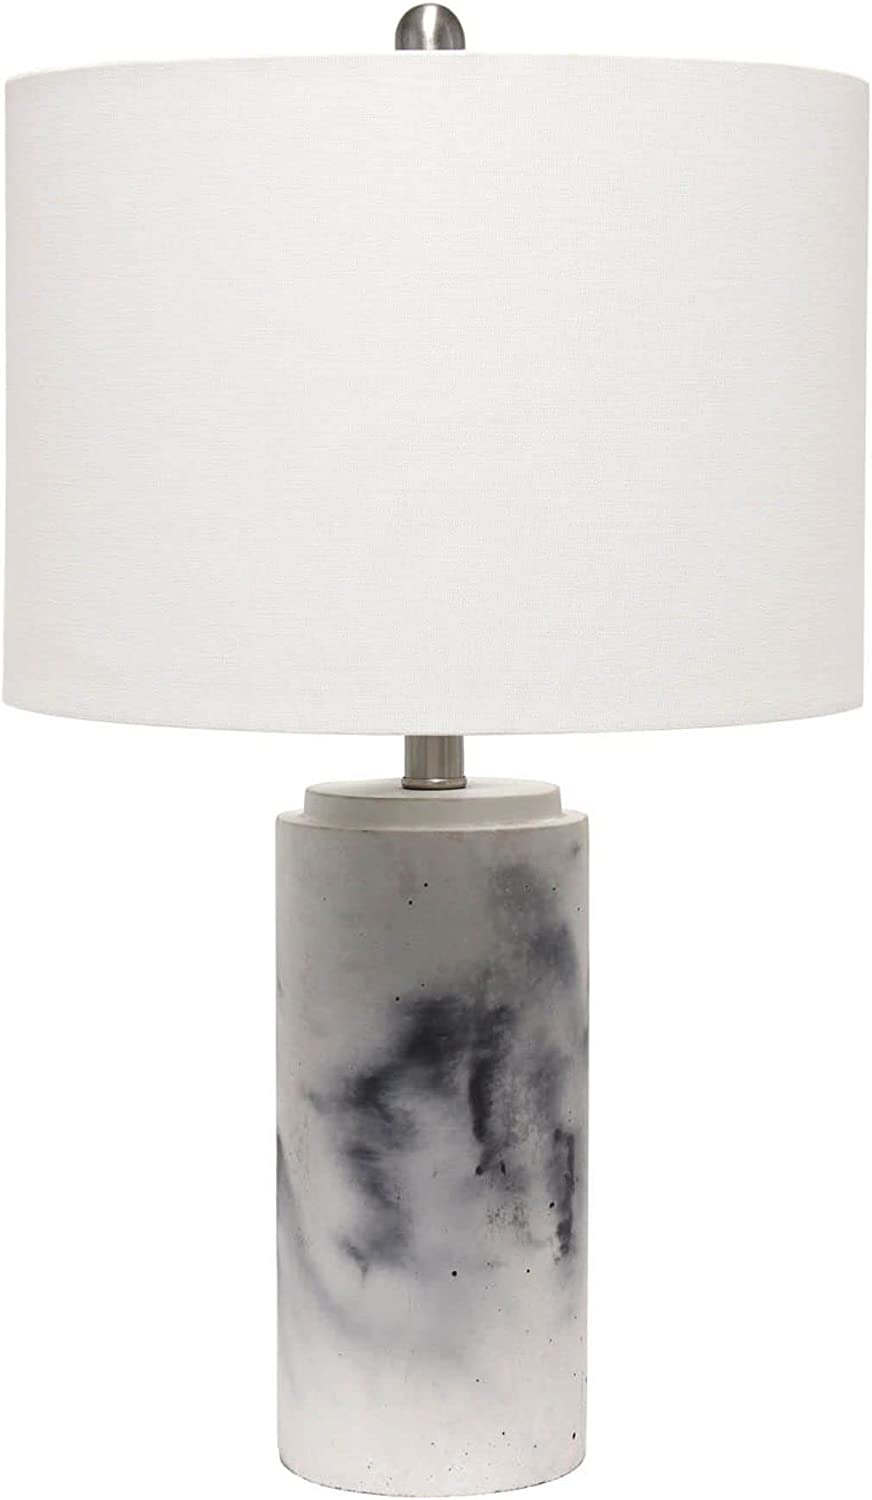 Lalia Home Modern Marbleized Table Lamp with White Fabric Shade - White